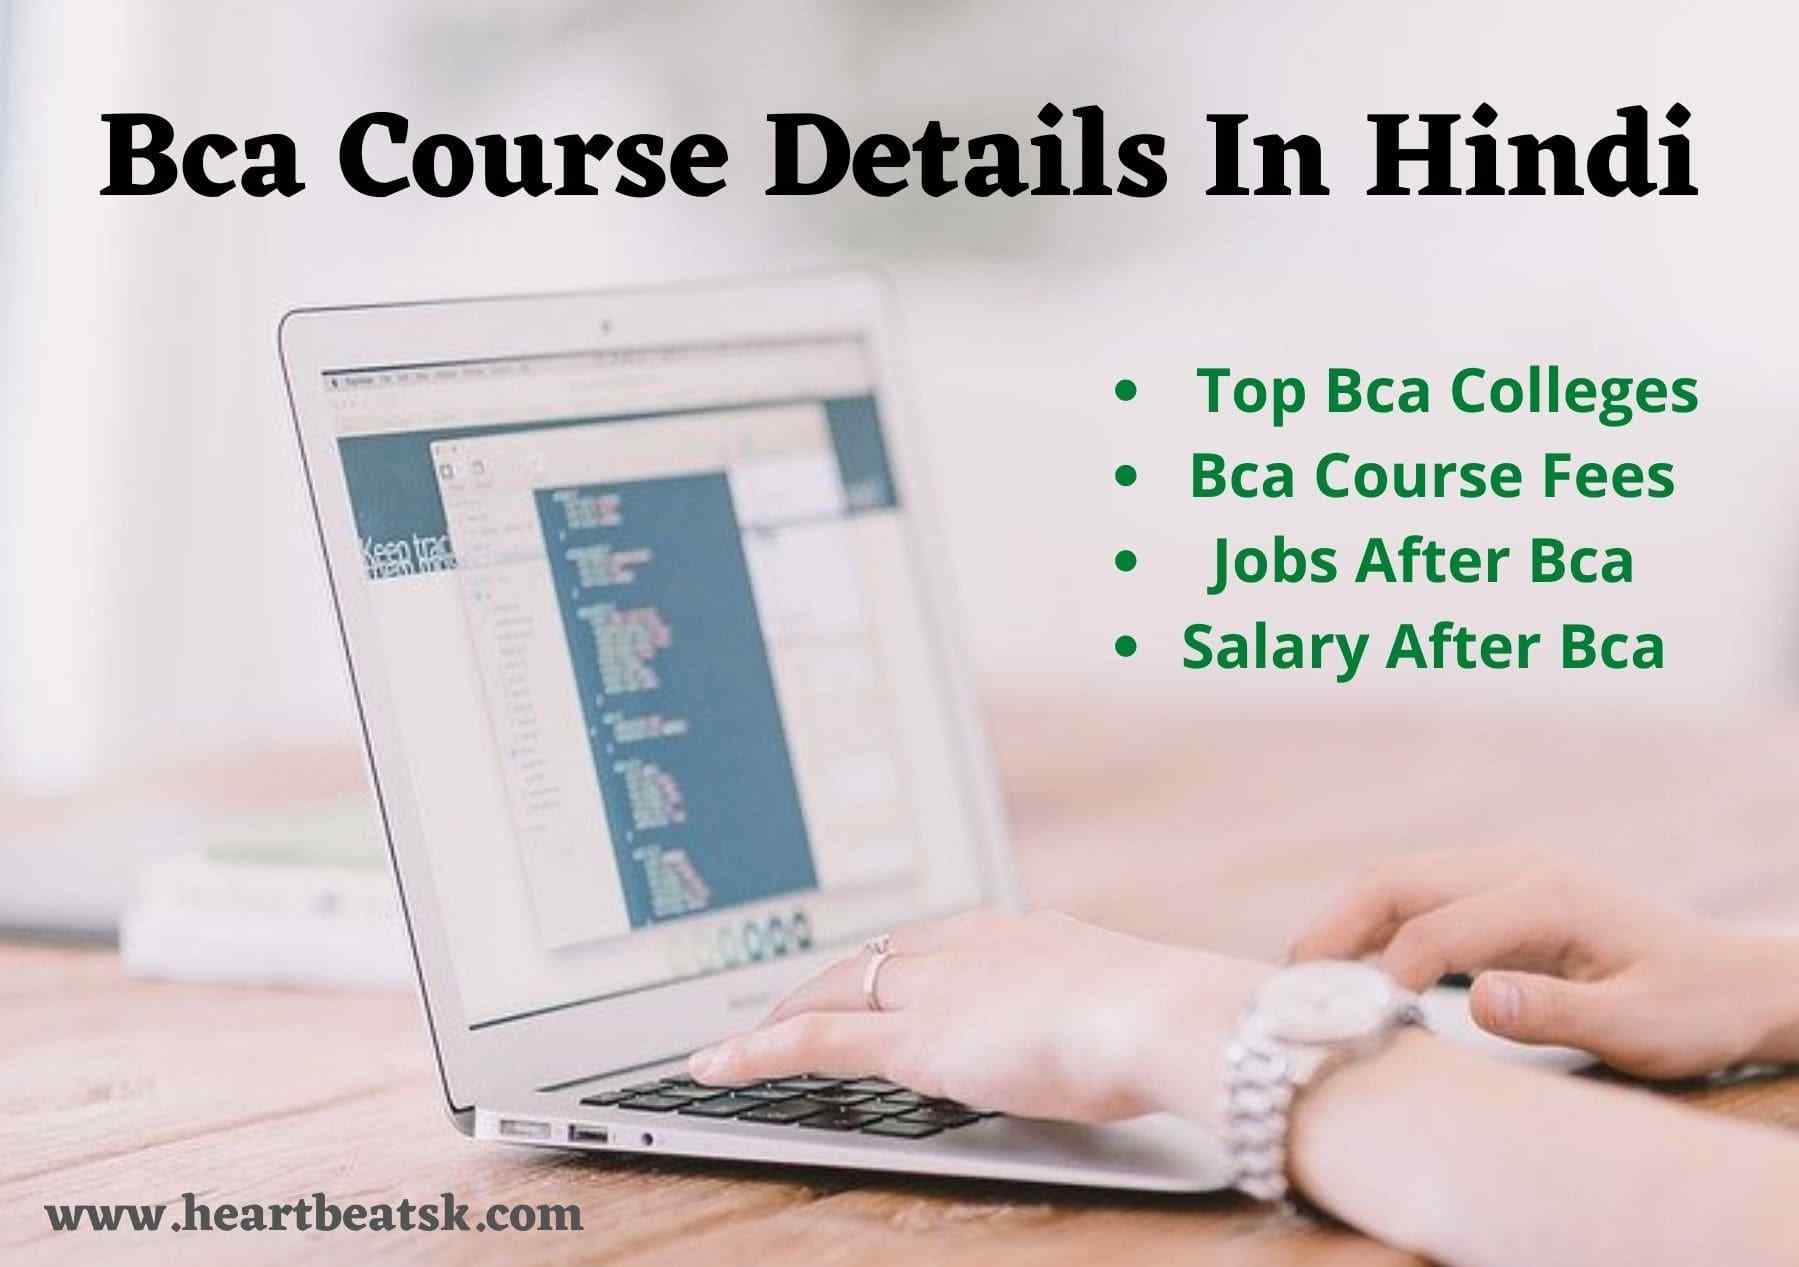 Bca Course Details In Hindi 